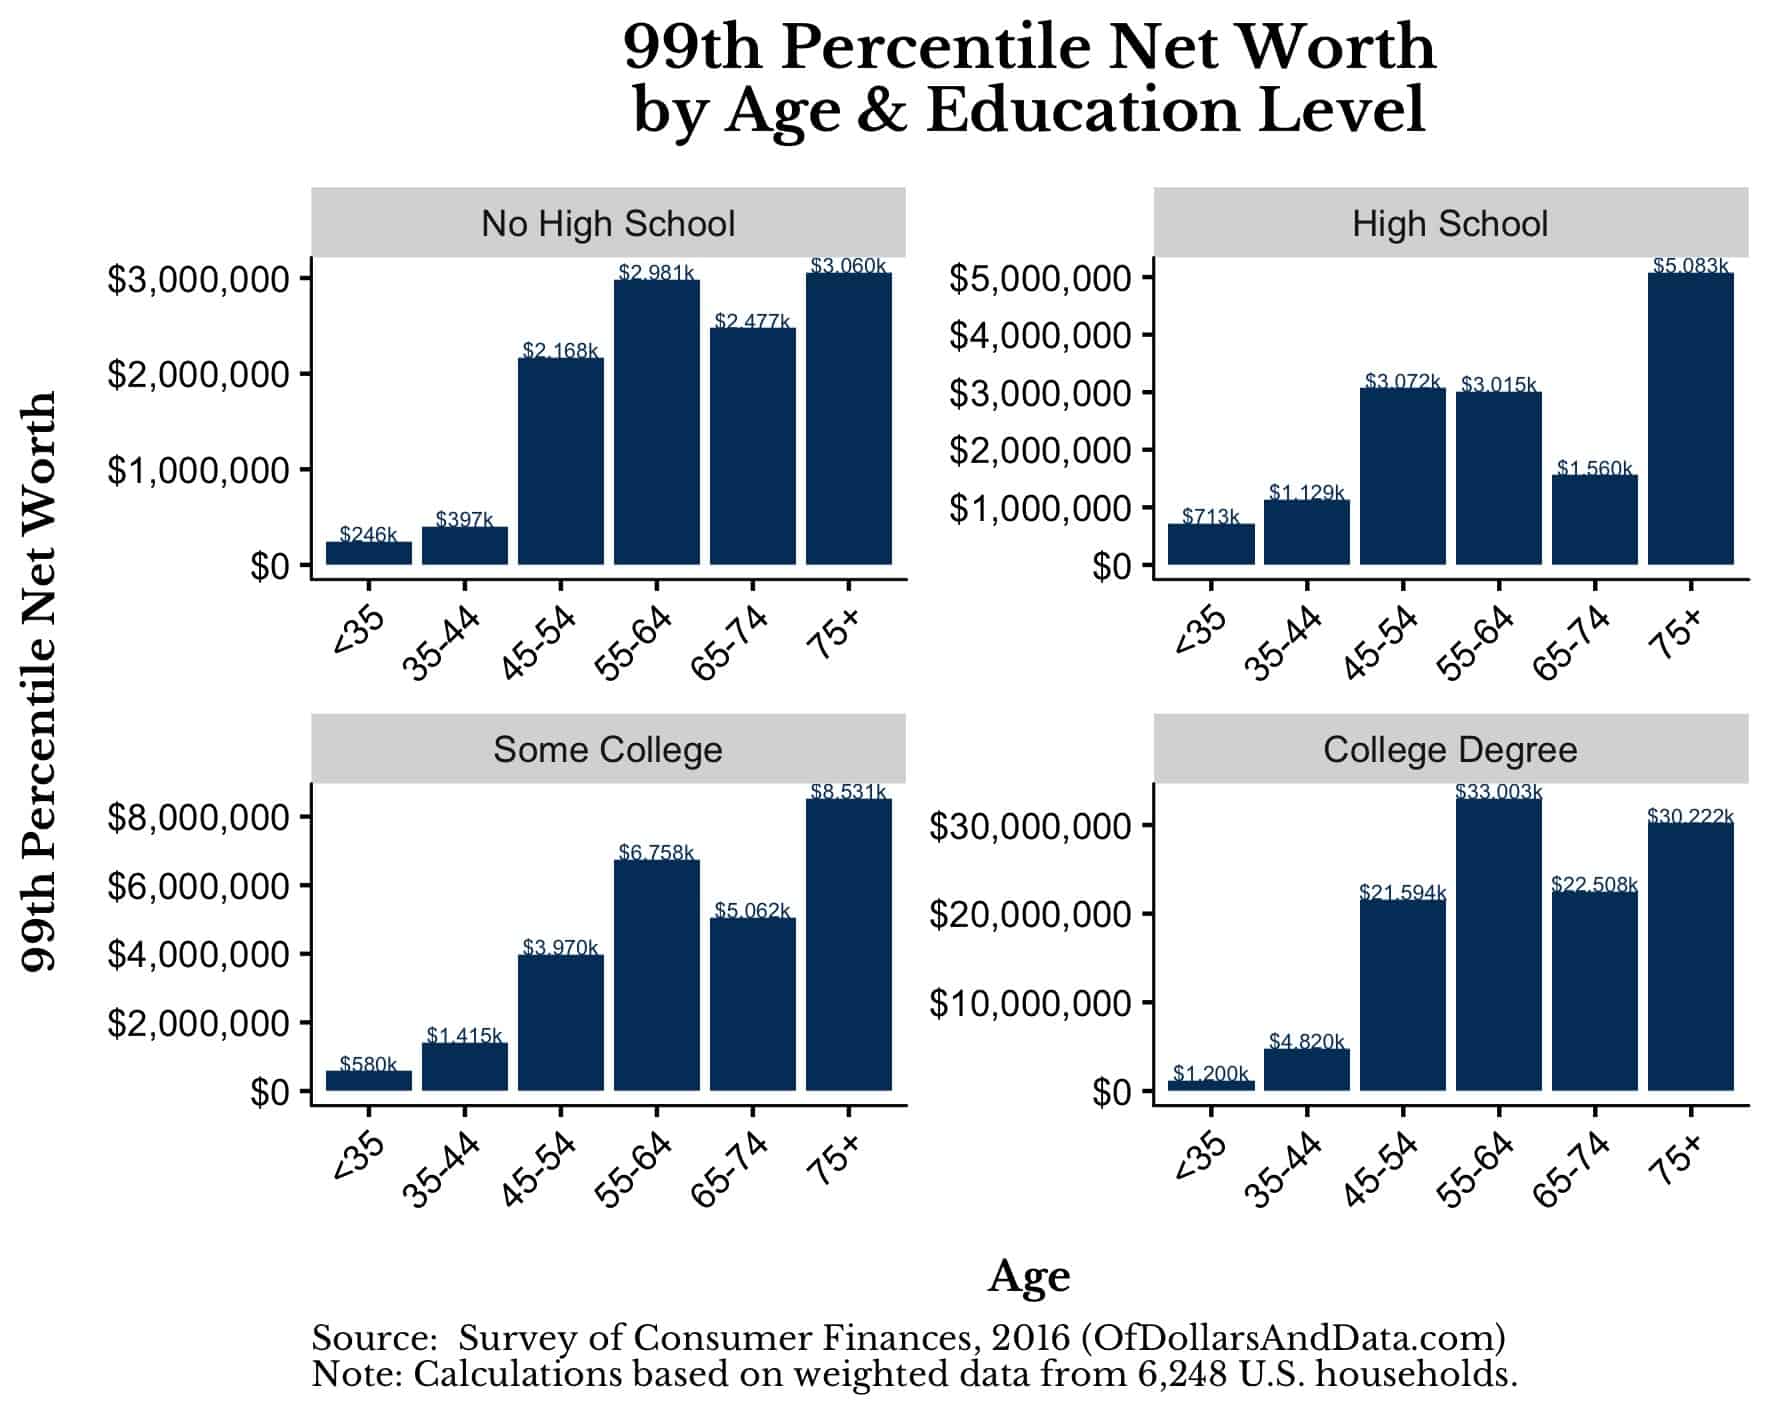 99th percentile net worth by age and education level, 2019 Survey of Consumer Finances.